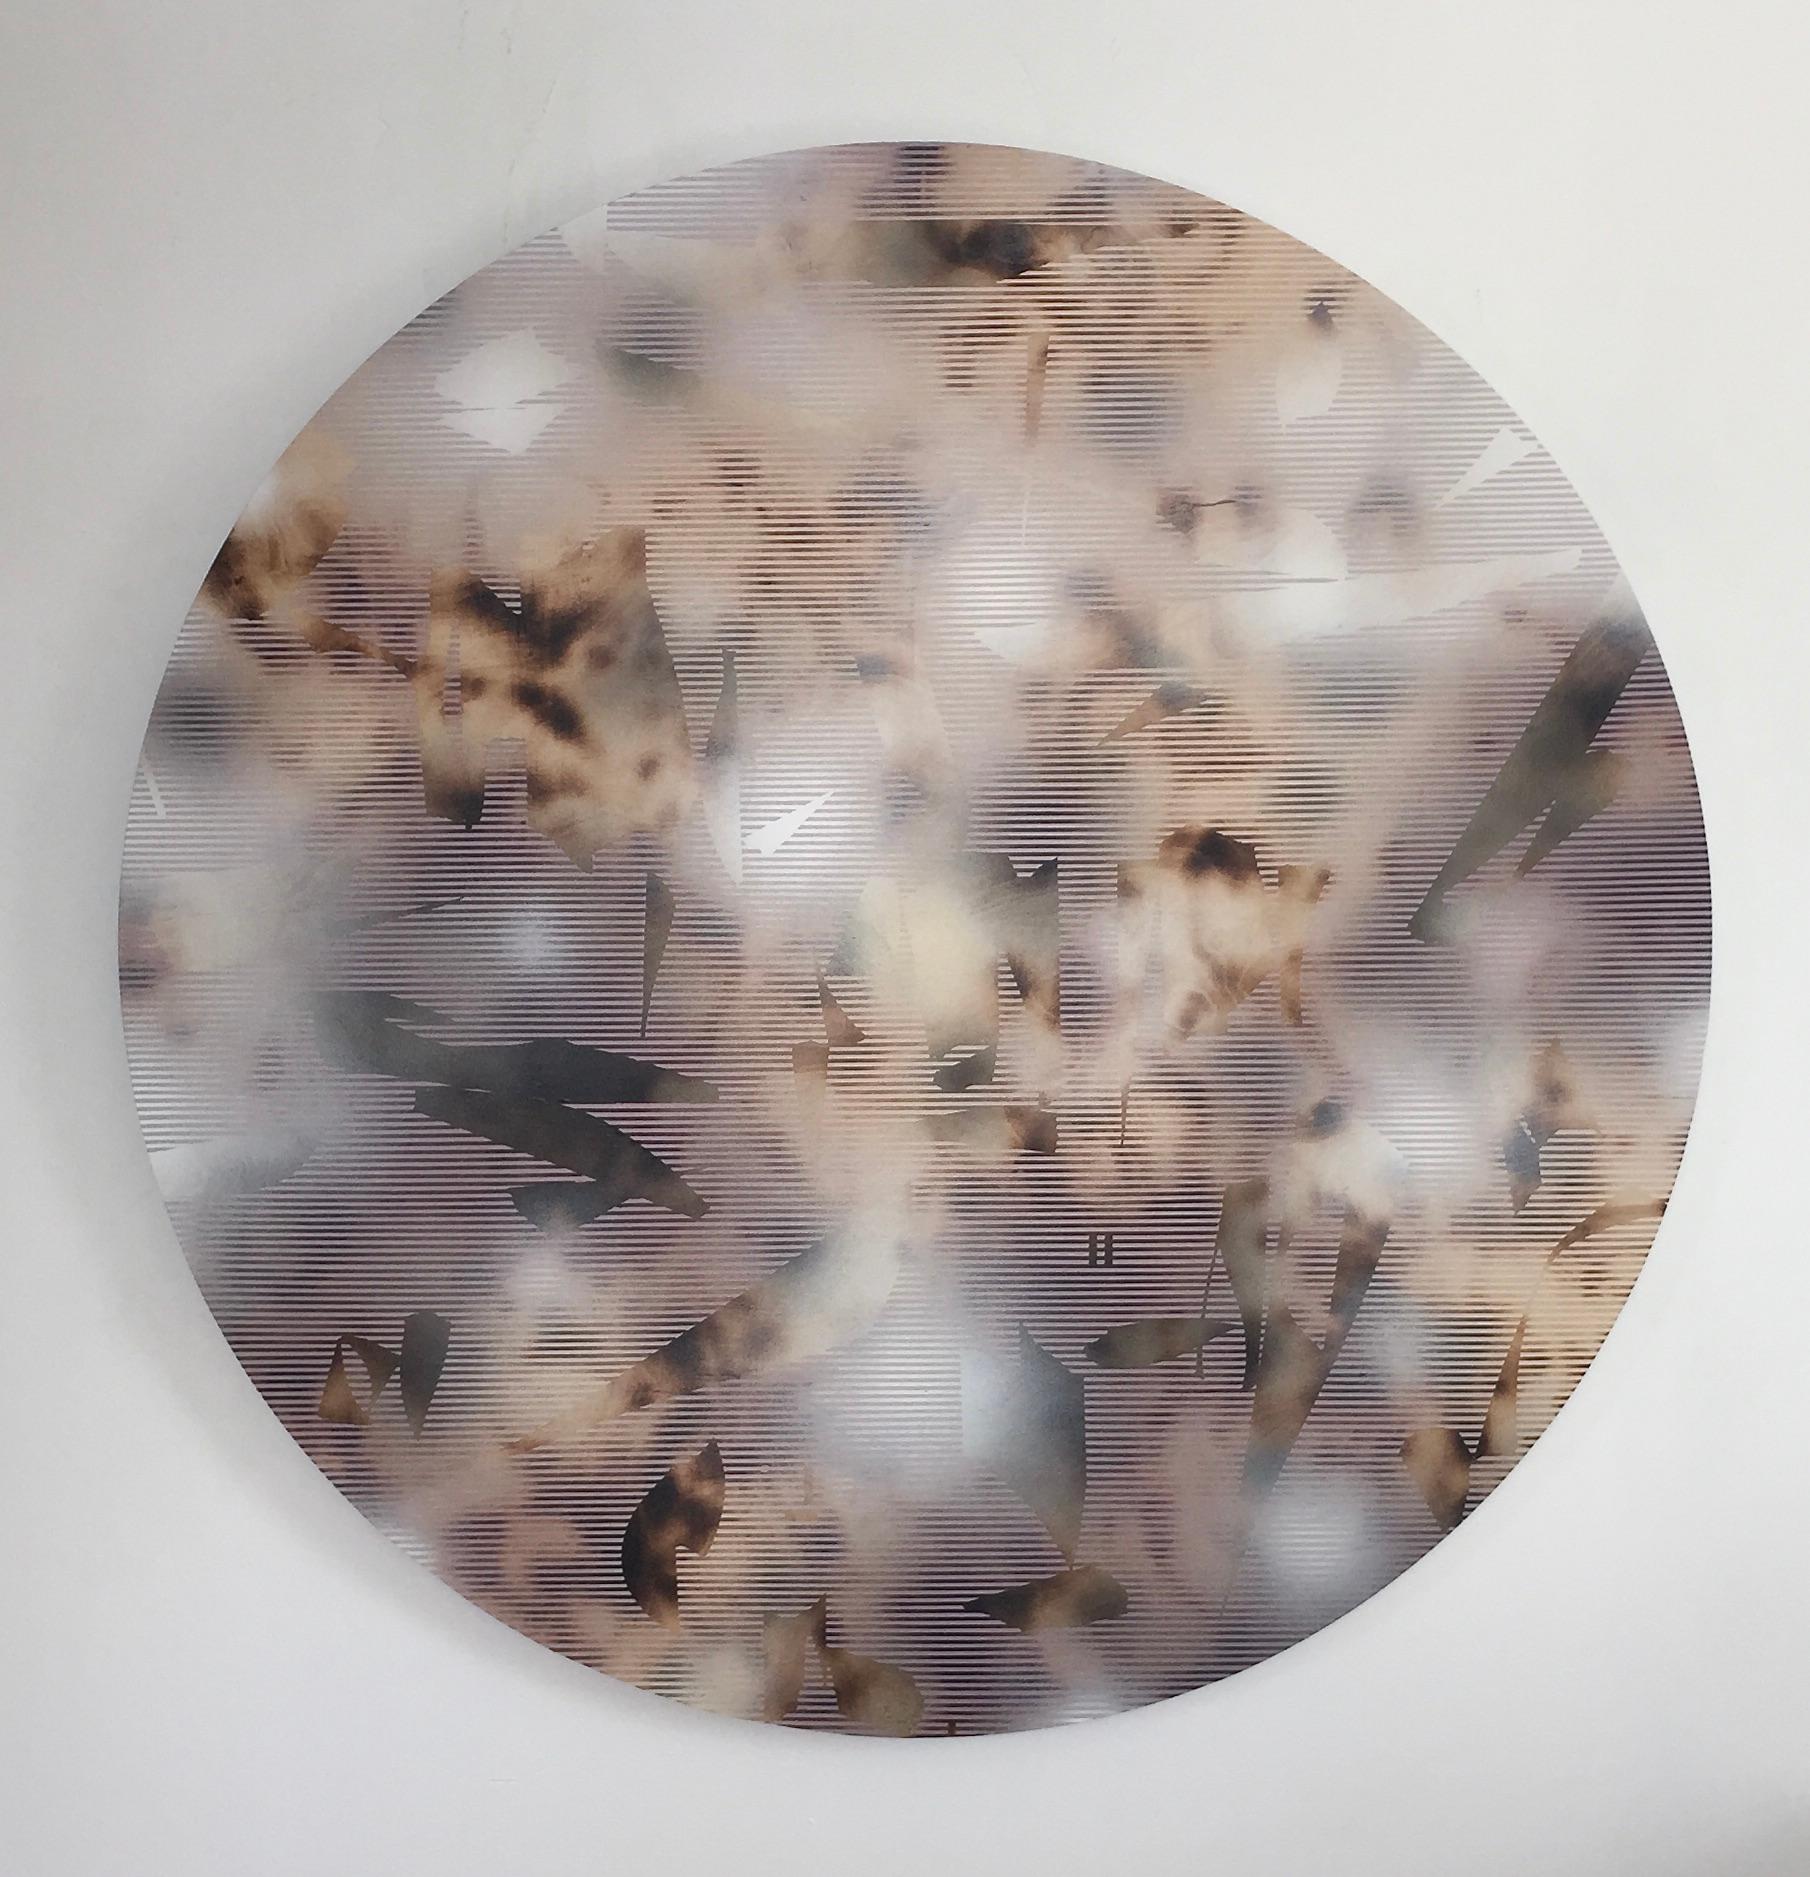 Nacre, Plea and entice 3 (round circular grid painting abstrakte Holz neutrals)